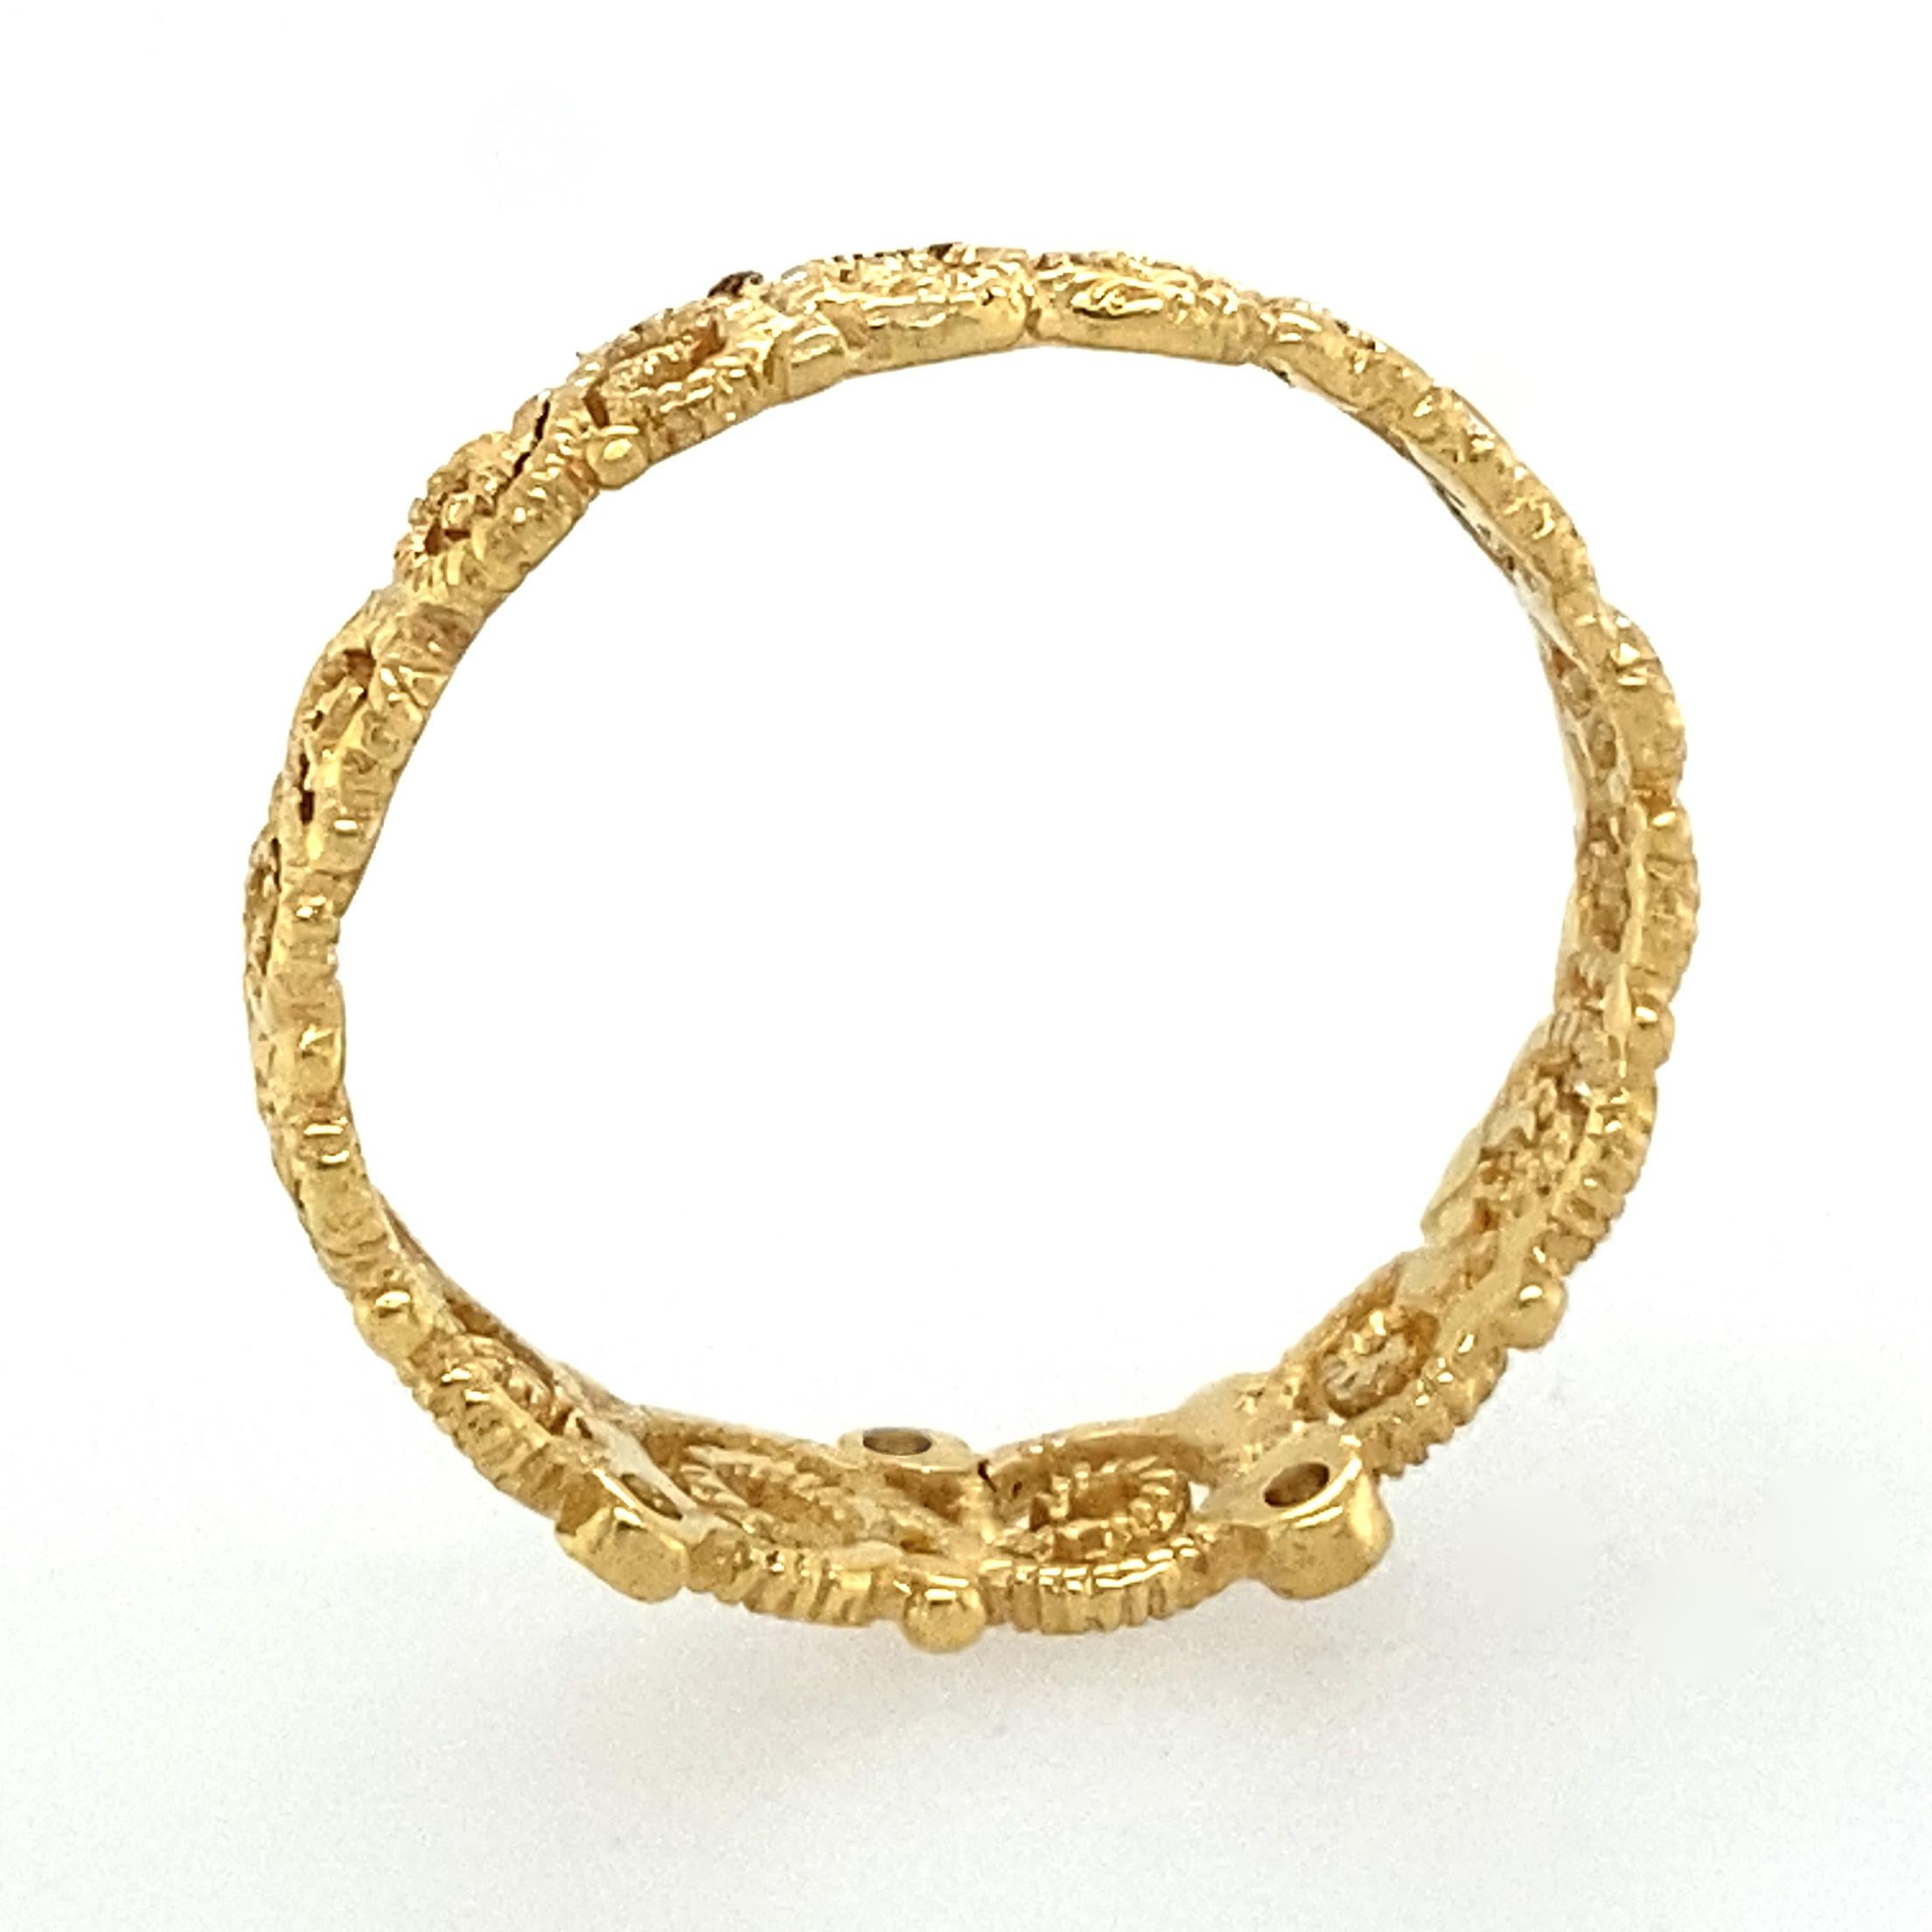 Open Scrollwork Band in 18 Karat Yellow Gold with Diamond Accents 6